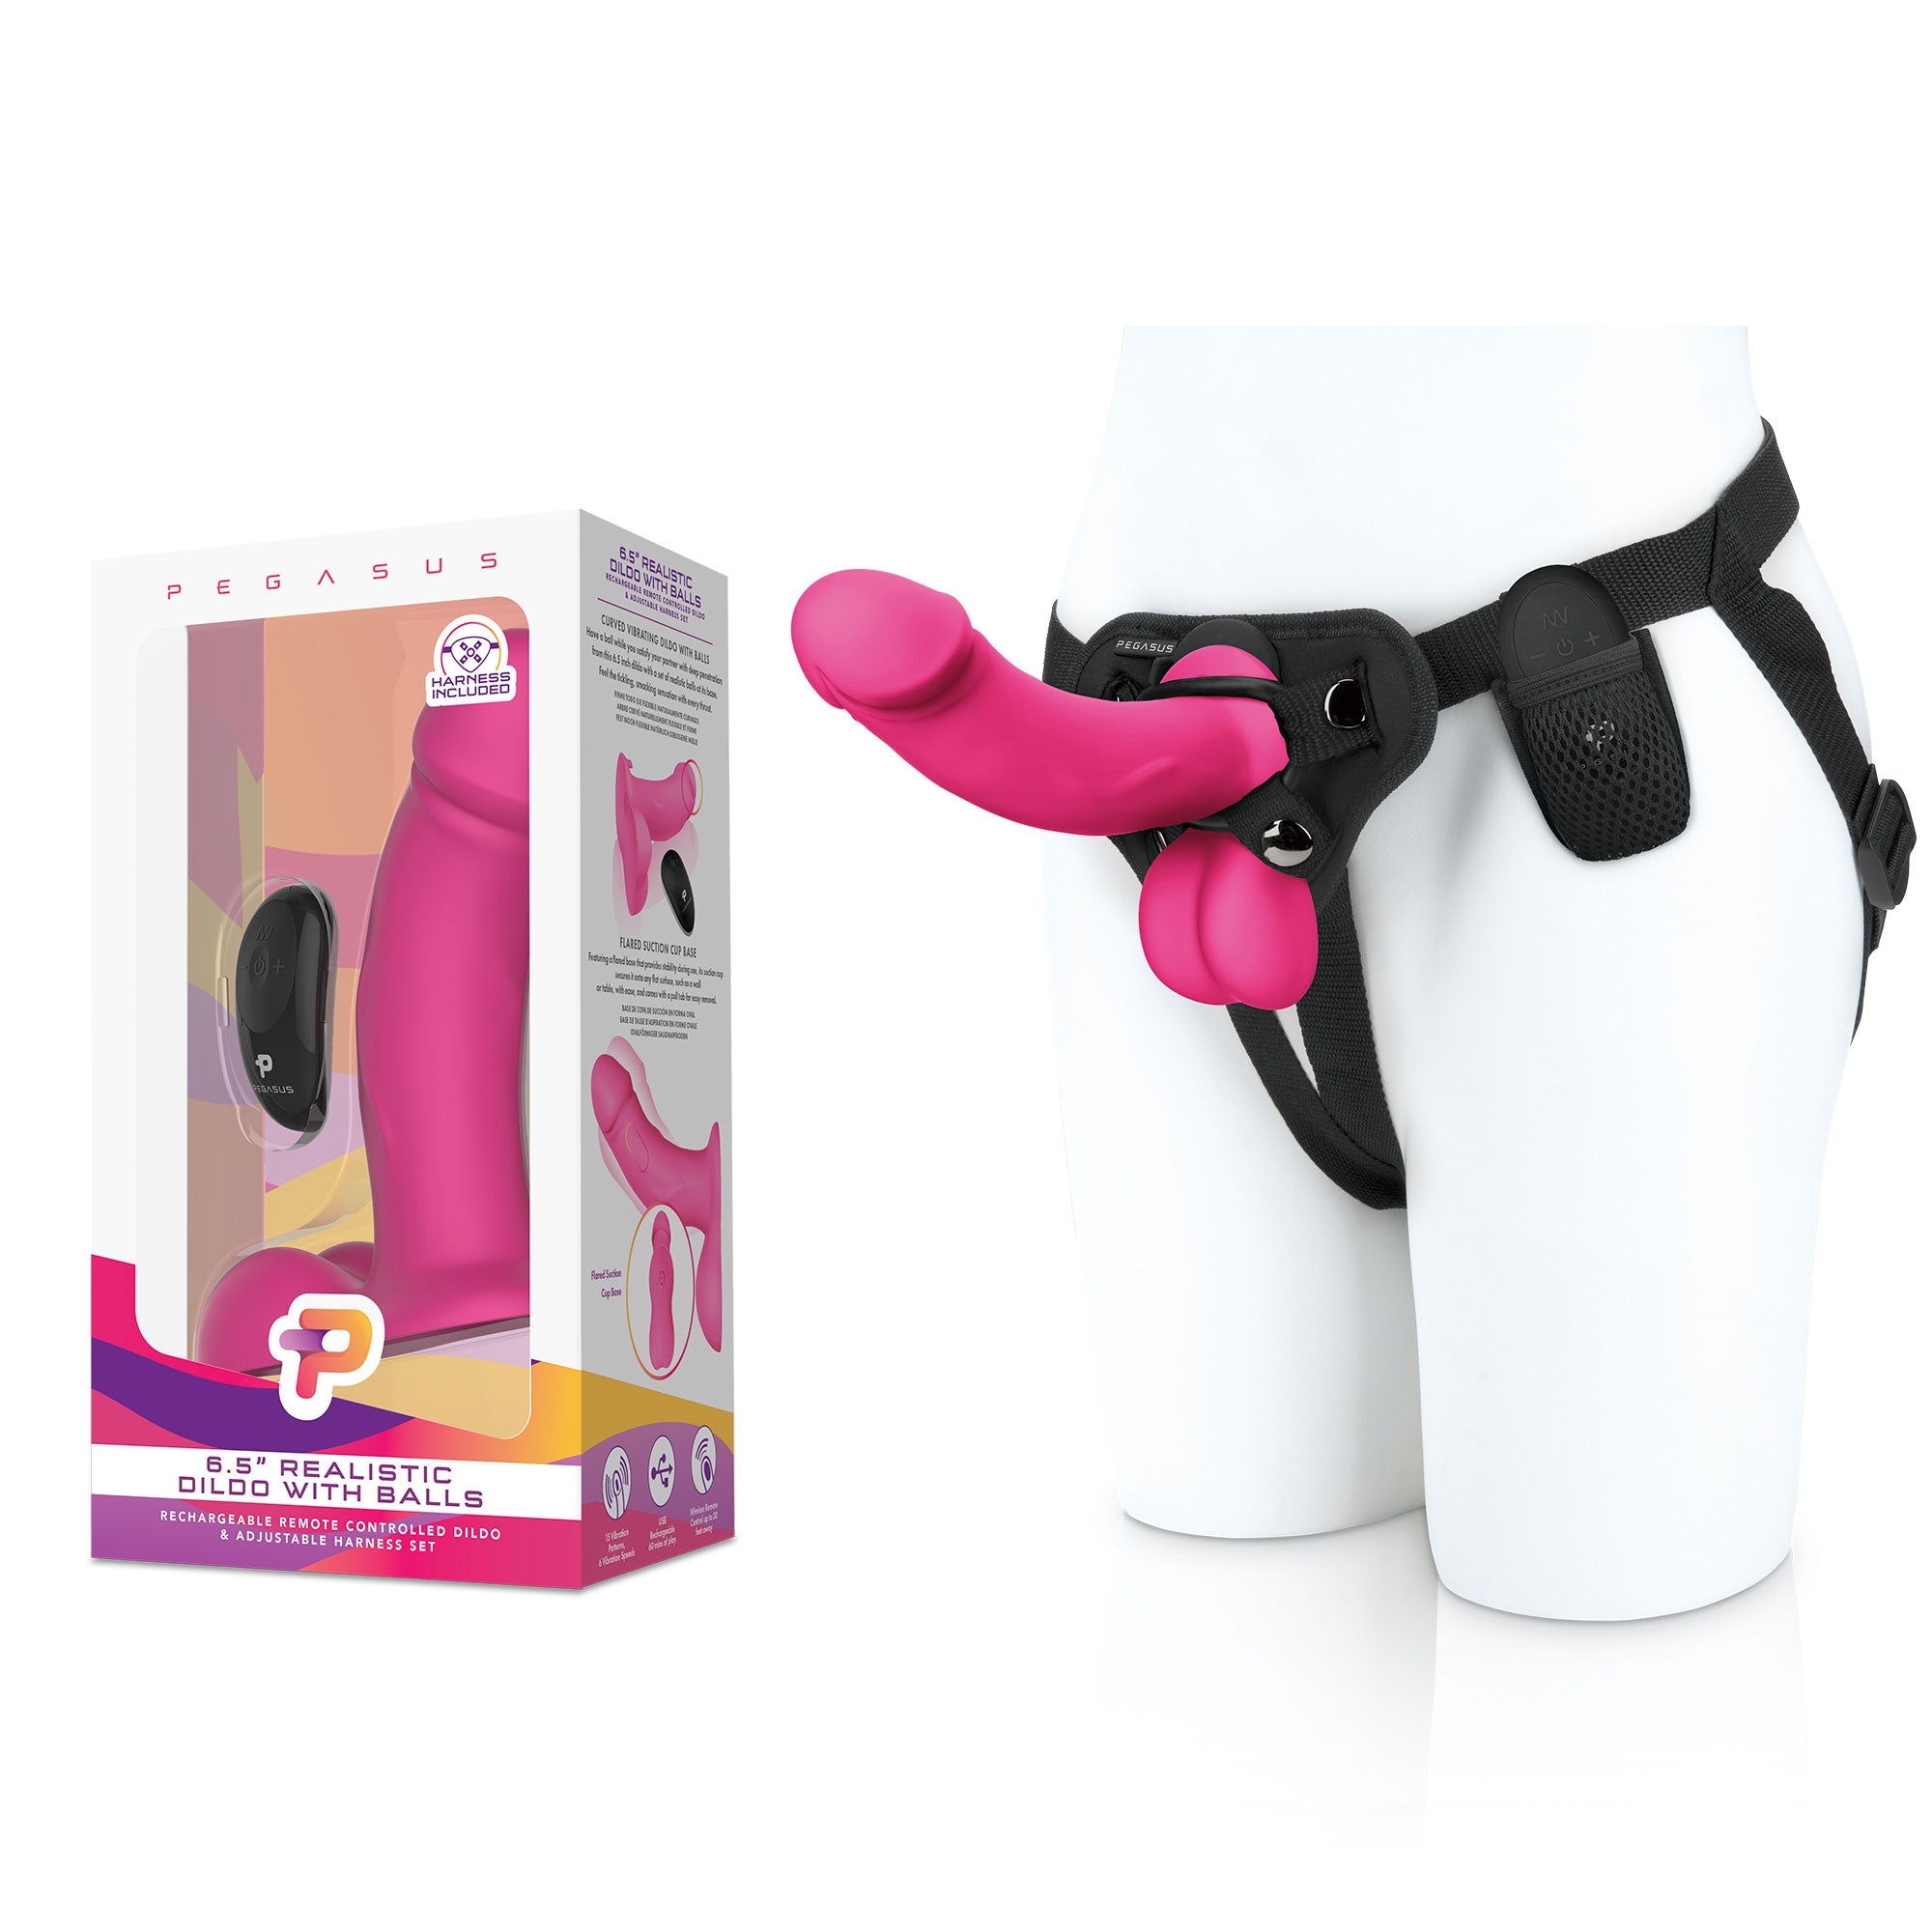 Packaging of Pegasus 6.5" Realistic Silicone Vibrating Pegging Dildo and Balls with Remote Control and Adjustable Harness at glastoy.com